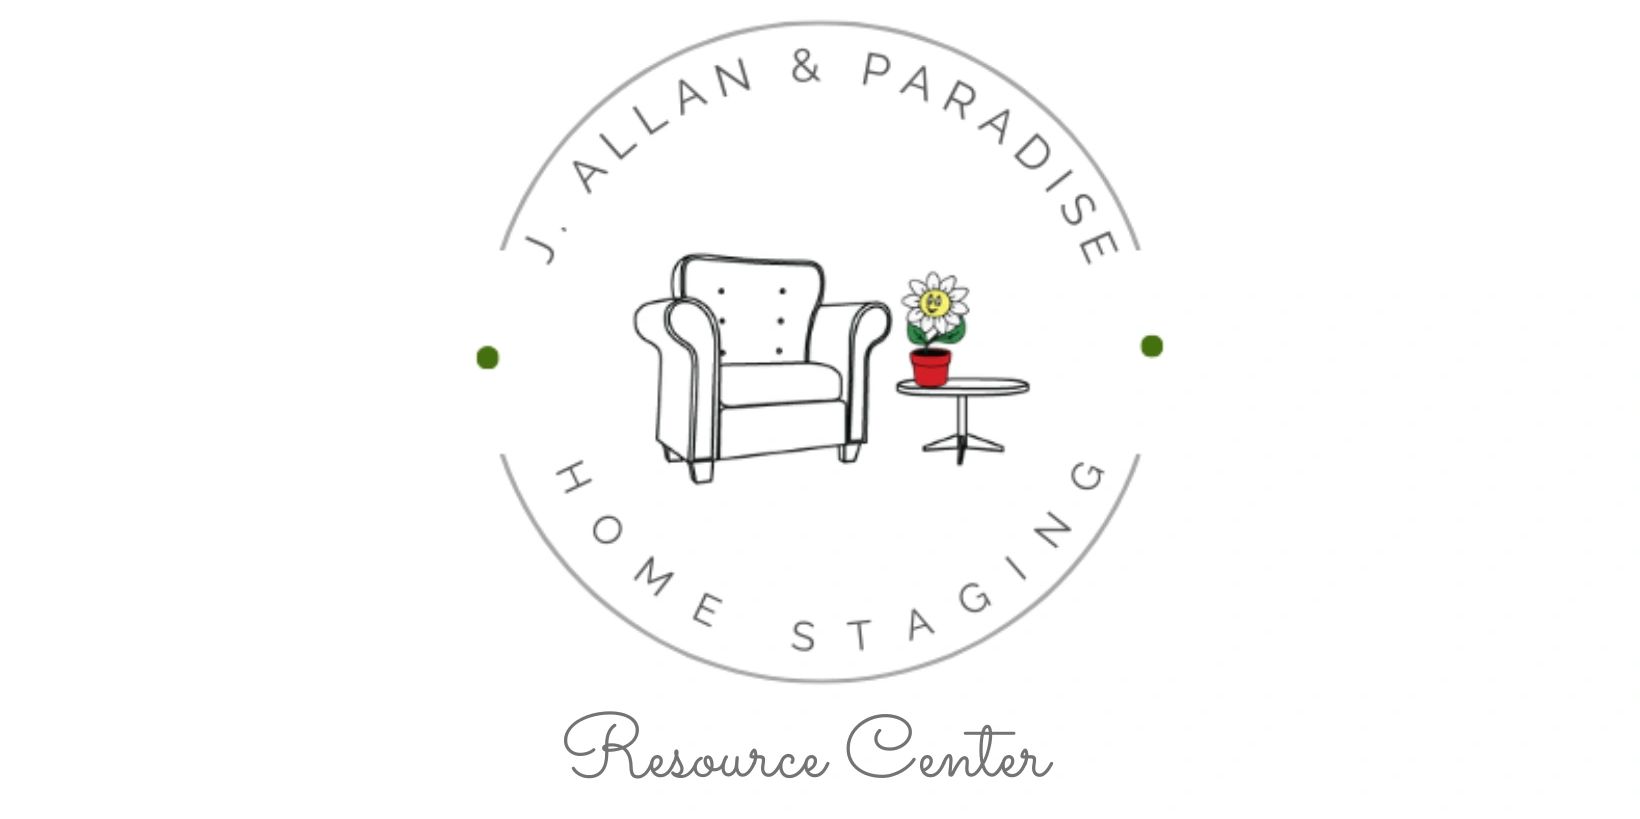 Home Staging J. Allan & Paradise Home Staging Resources 